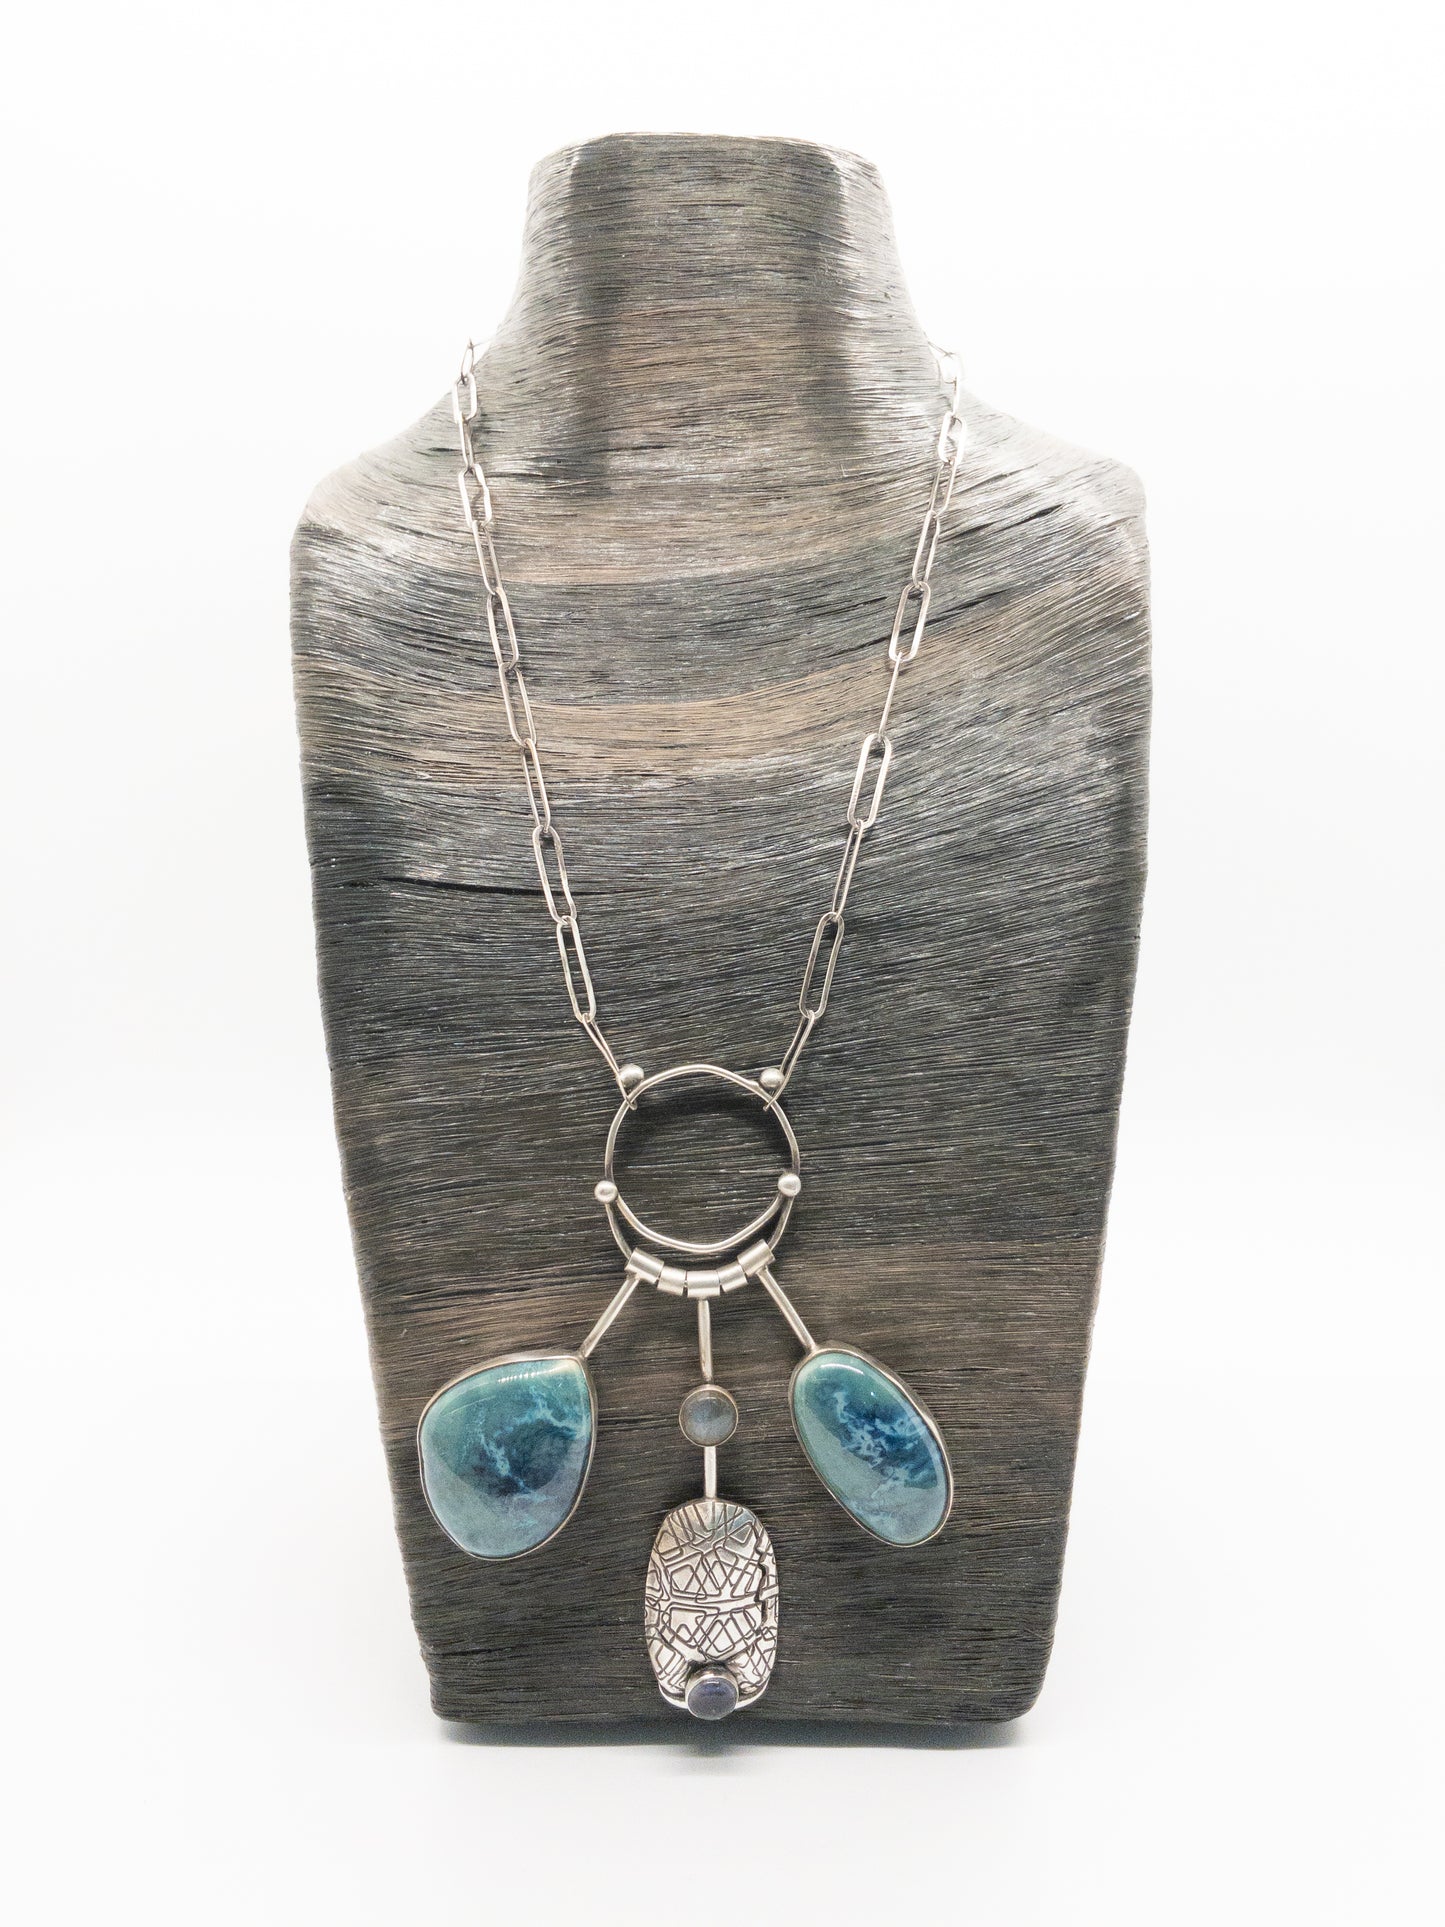 Sterling Silver 3 Pendant Necklace Turquoise Pottery and Iolite